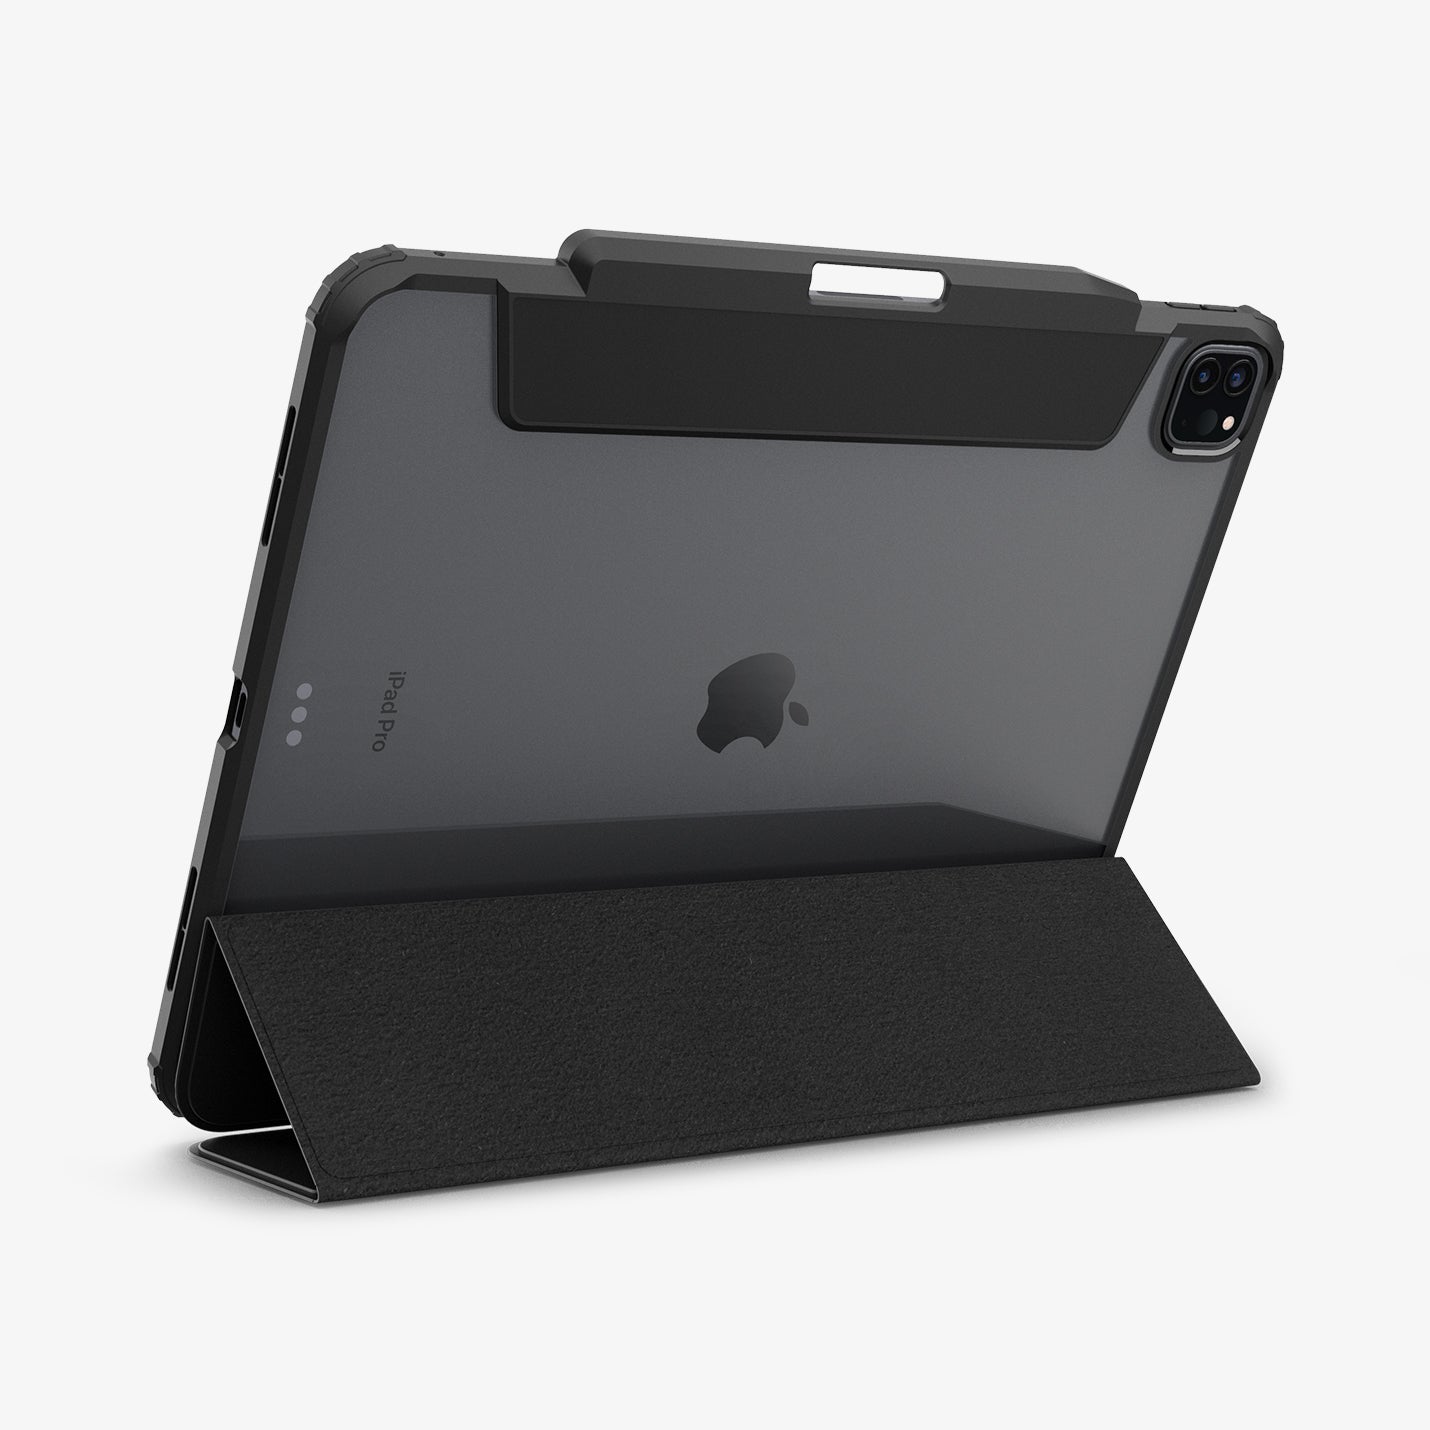 ACS07006 - iPad Pro 12.9-inch Case Ultra Hybrid Pro in Black showing the back, with front cover folded, propped up behind to serve as a stand without stylus pen